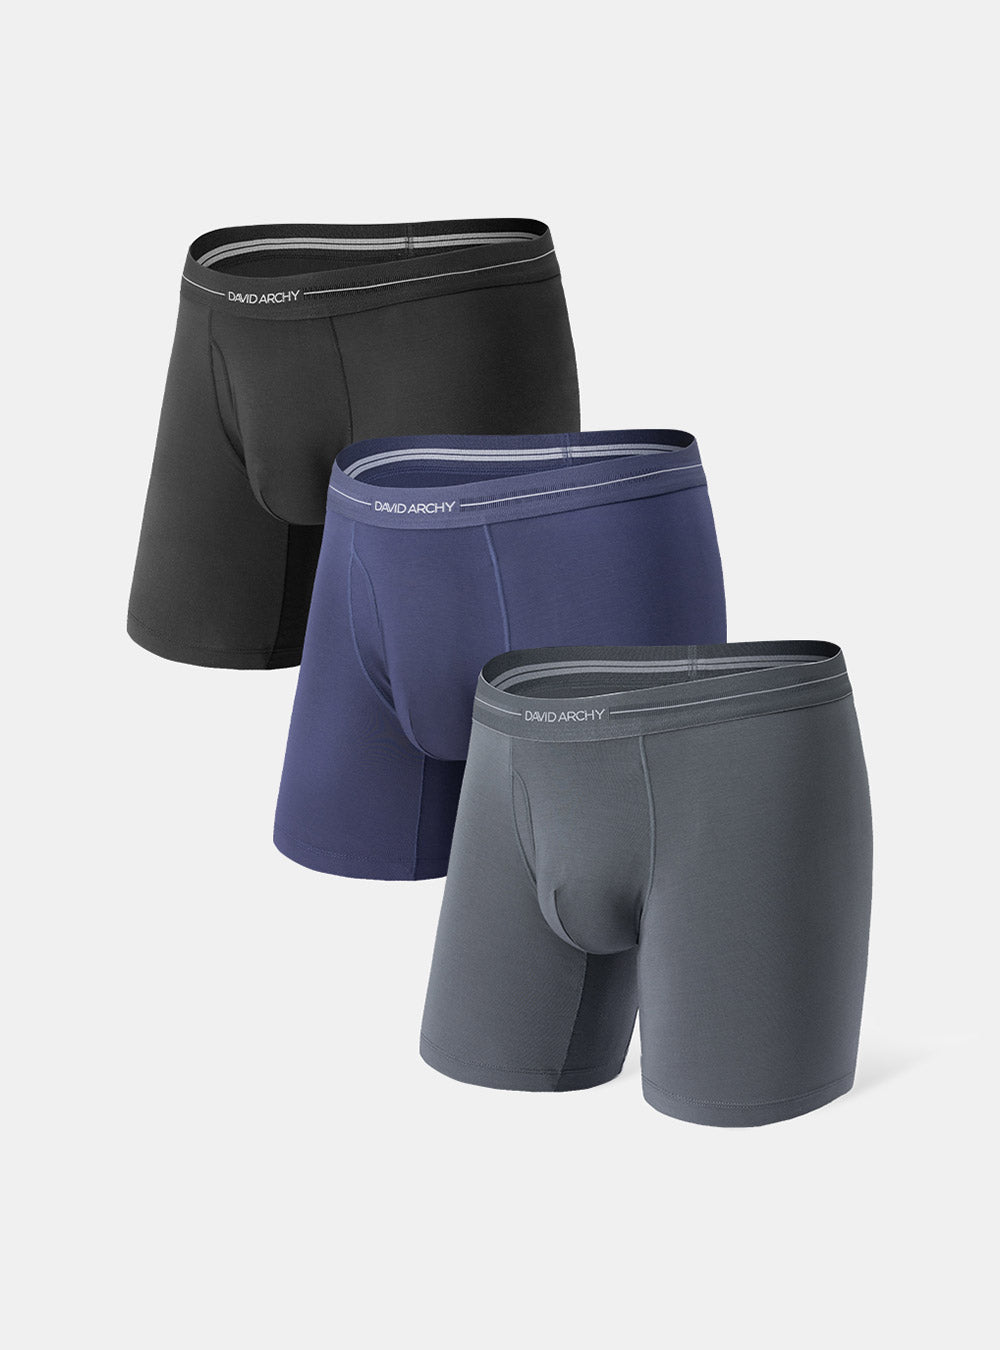 DAVID ARCHY Men's Underwear Breathable Boxer Briefs Bamboo Rayon Super Soft  Trunks with Fly in 4 Pack (S, Black/Dark Gray/Navy Blue/Heather Gray - 5.  inchesin 4 Pack) : : Clothing, Shoes 